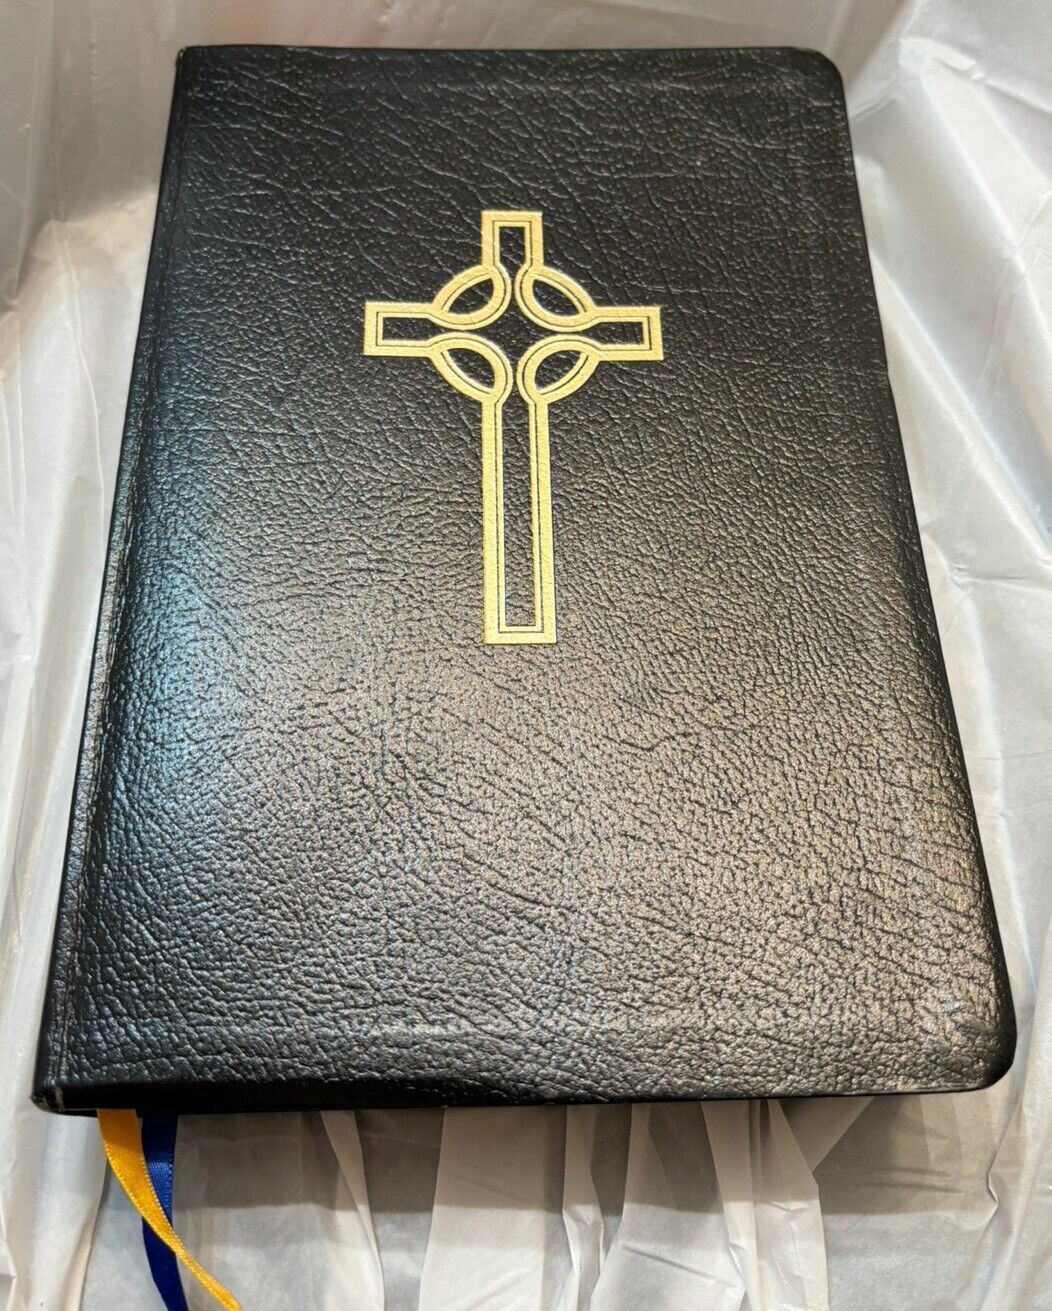 Book of Common Worship: Bonded Leather - Black VGC 1993 Westminster